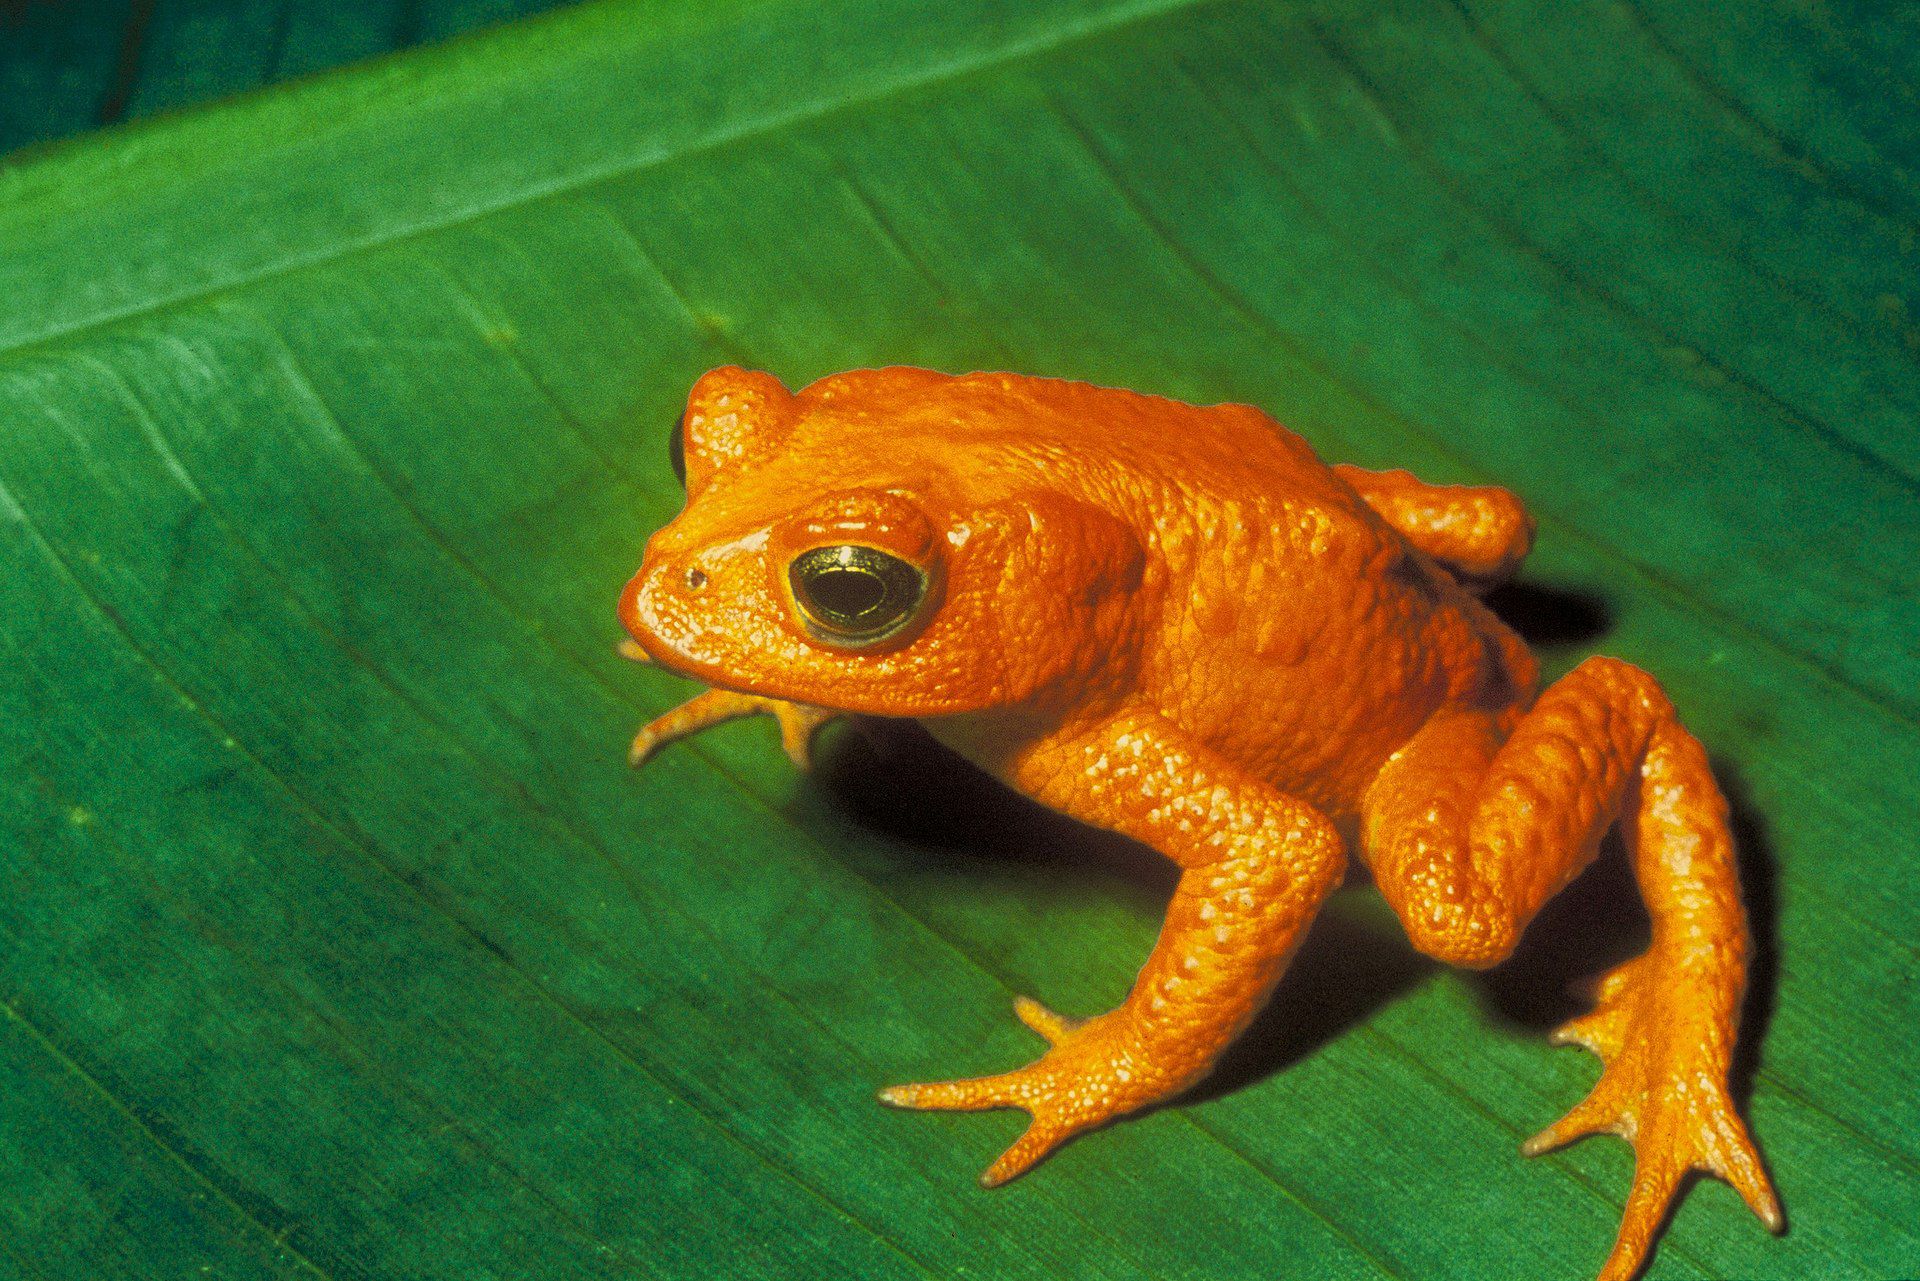 <p>The Golden Toad was last seen in 1989 and is <a href="https://www.ifaw.org/animals/golden-toads">now considered extinct</a>. Climate change, habitat loss, and pollution contributed to their decline. The drying of their breeding pools due to changing weather patterns was a significant factor that <a href="https://www.rainforesttrust.org/our-impact/rainforest-news/thirty-years-after-the-last-golden-toad-sighting-what-have-we-learned/">led to their demise.</a> The extinction of the Golden Toad highlights the severe impacts of climate change on amphibian populations and the urgent need for environmental protection.</p><p><i>This article was produced and syndicated by <a href="https://mediafeed.org/">MediaFeed.</a></i></p>